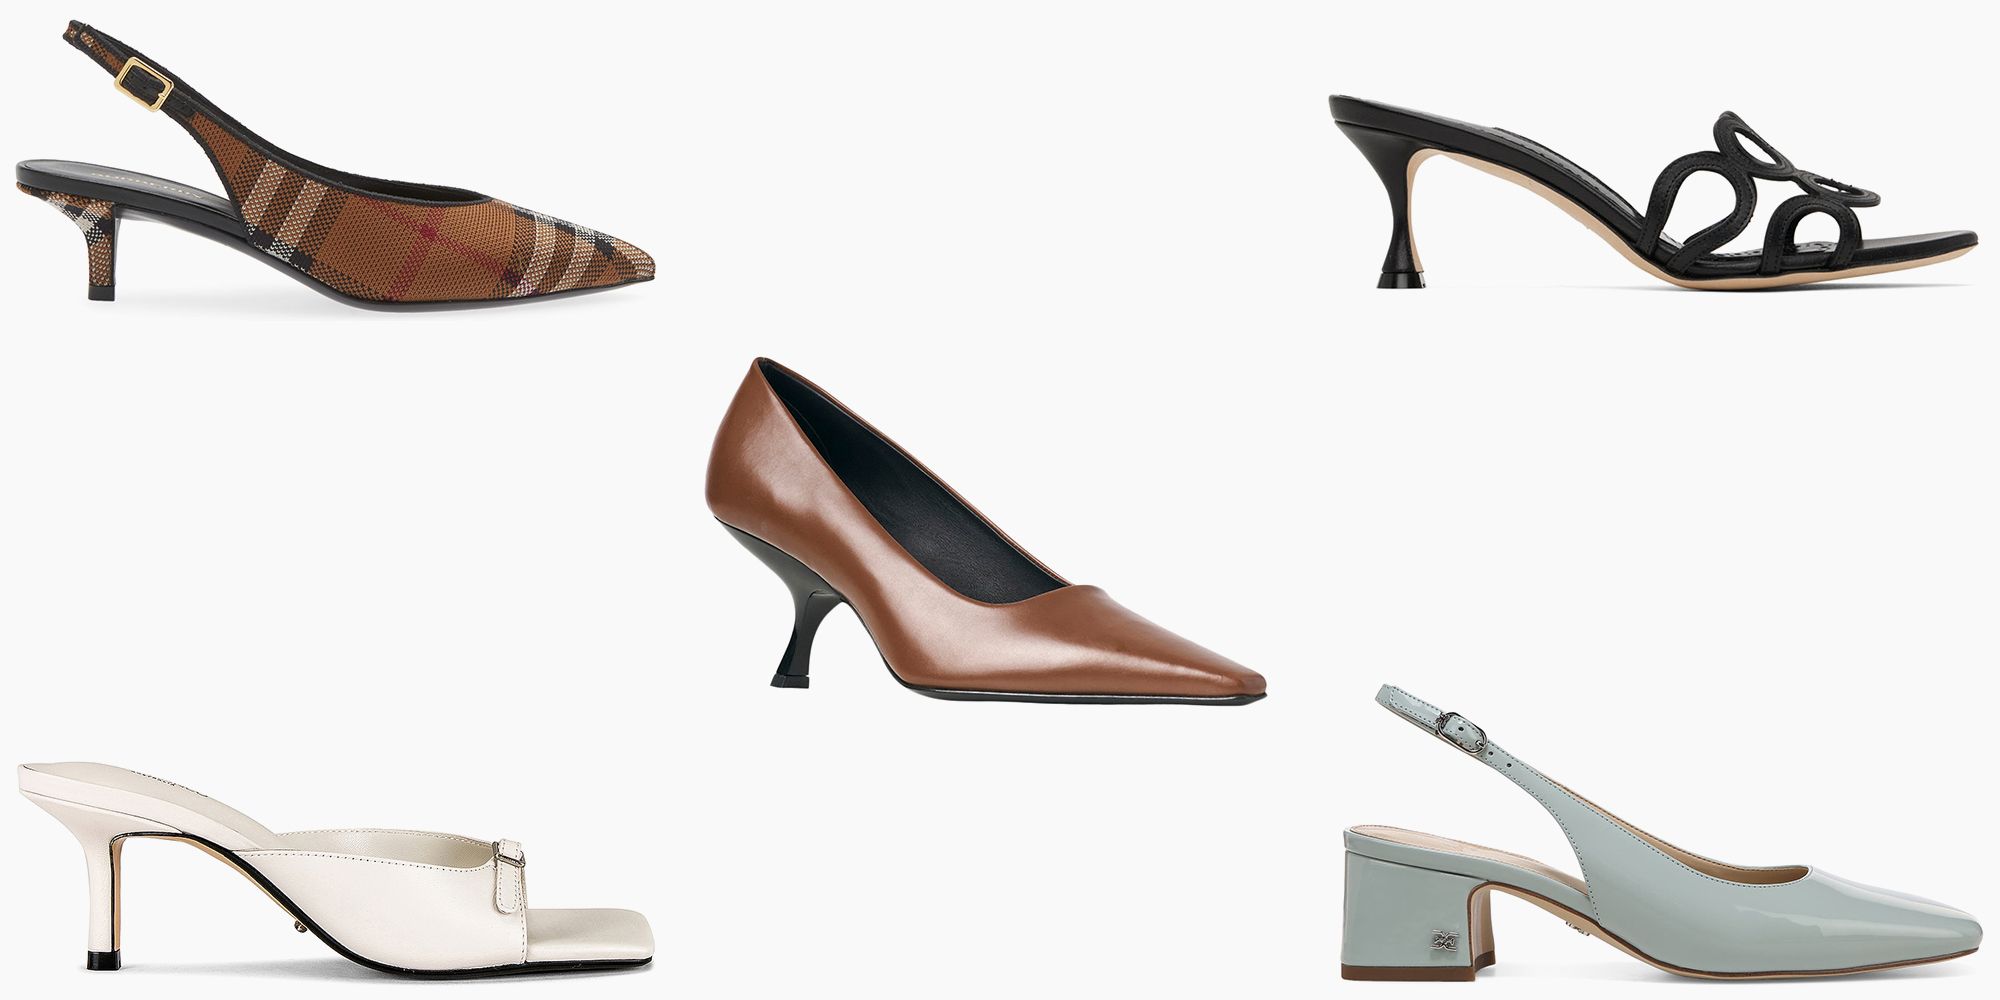 Men's Heels Are on the Rise—Here's Where to Shop for Them | Vogue